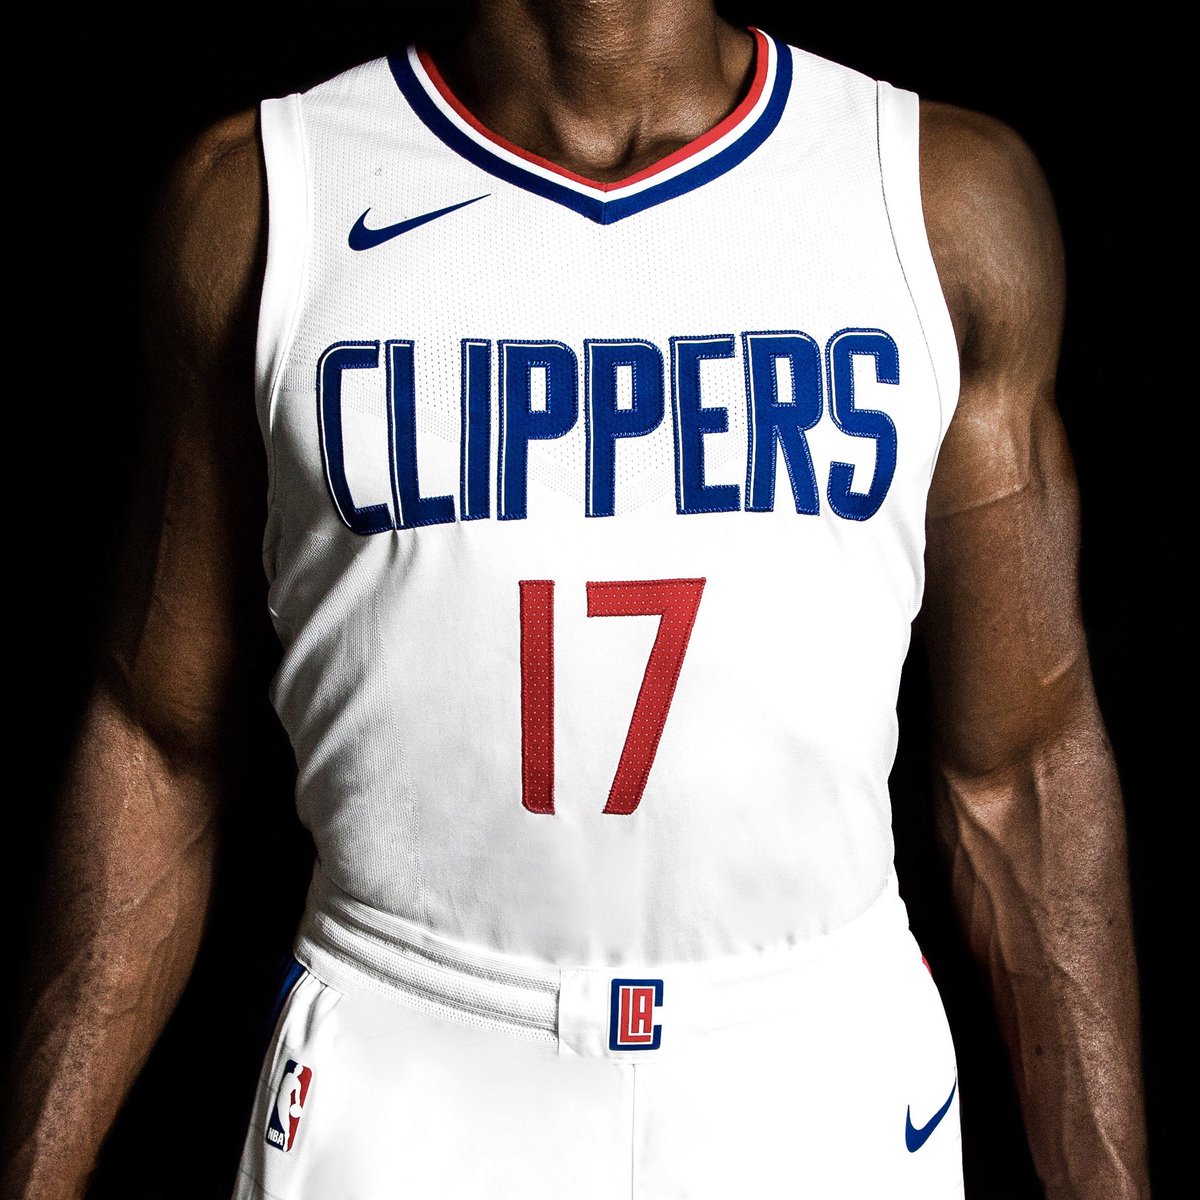 Uniforme Nike dos Clippers